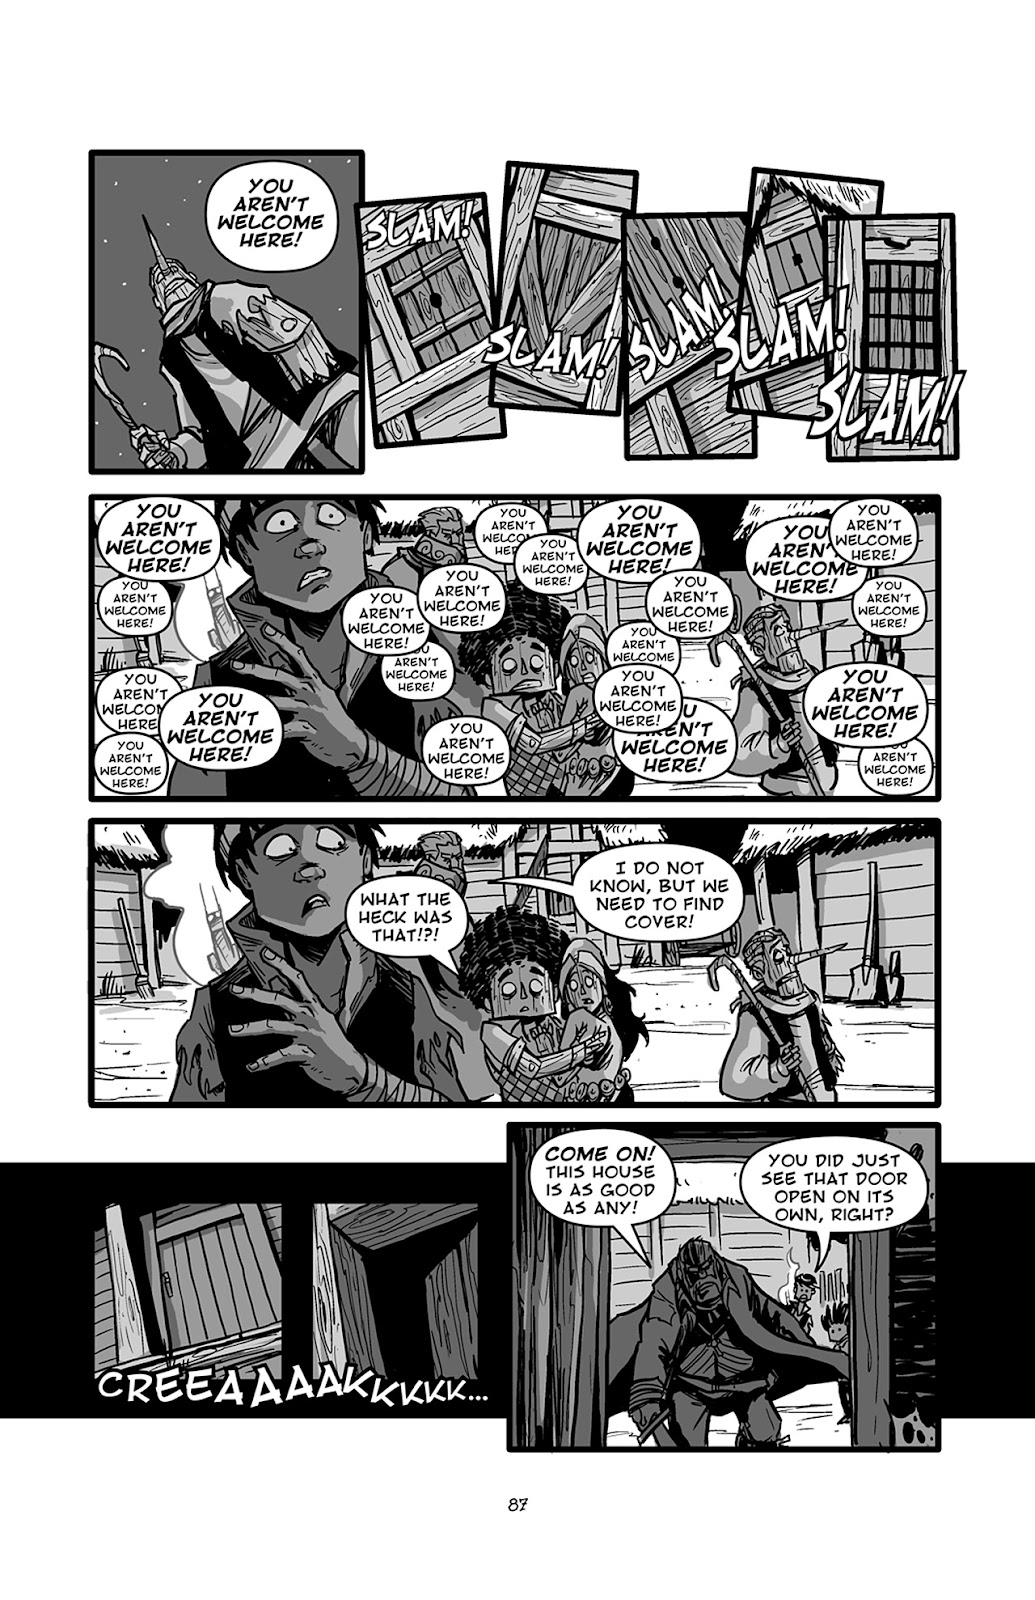 Pinocchio: Vampire Slayer - Of Wood and Blood issue 4 - Page 14